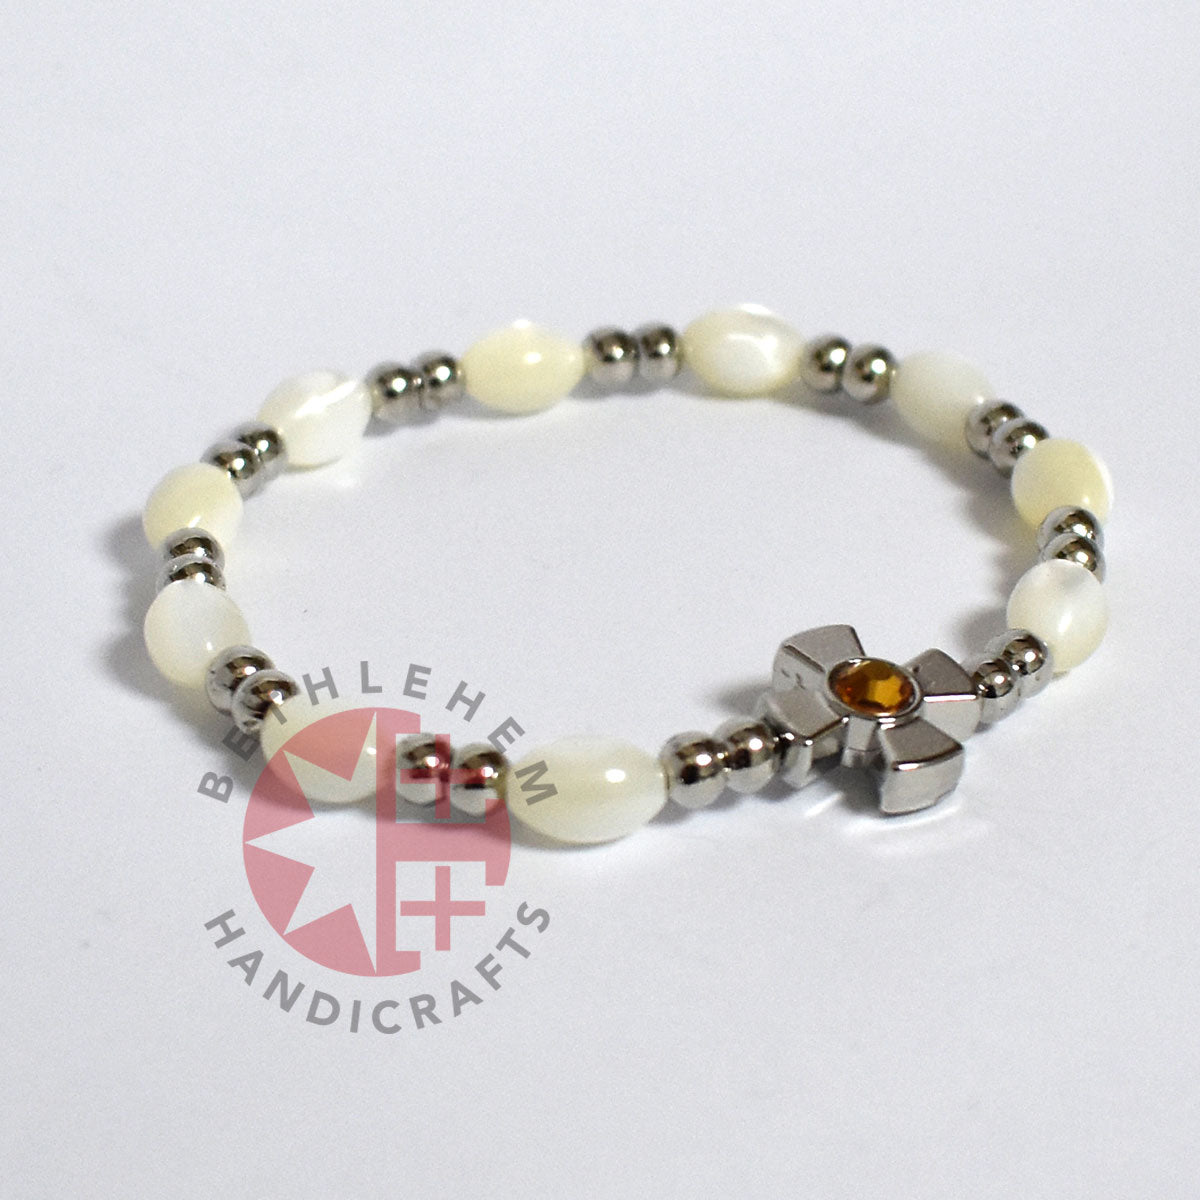 Mother of Pearl Bracelet 8 x 6mm Beads Citrine Crystal Stone